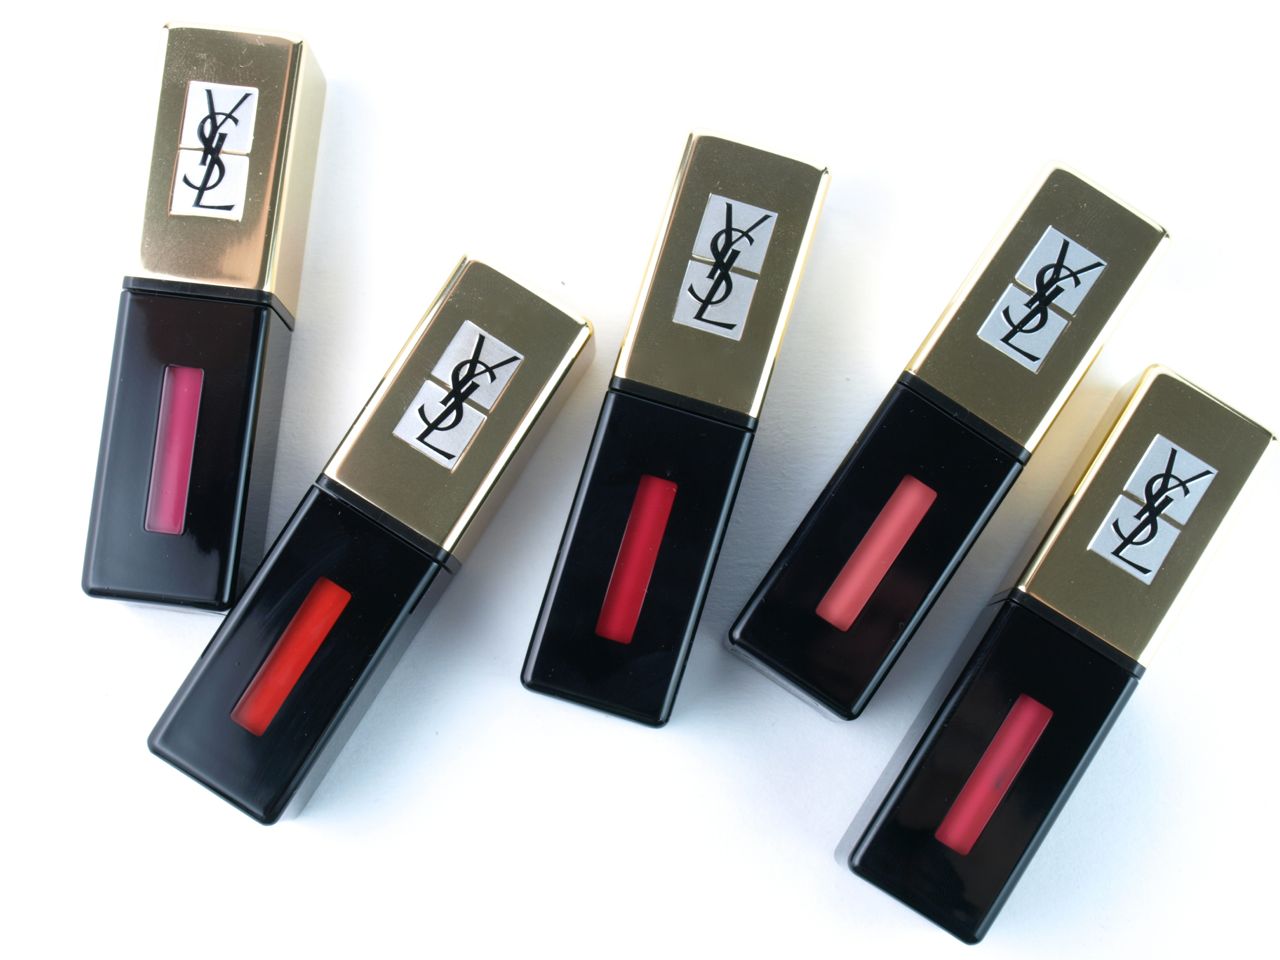 Yves Saint Laurent Vernis A Levres Pop Water Glossy Stain: Review and Swatches The Happy Sloths: Beauty, Makeup, and Skincare Blog Reviews and Swatches